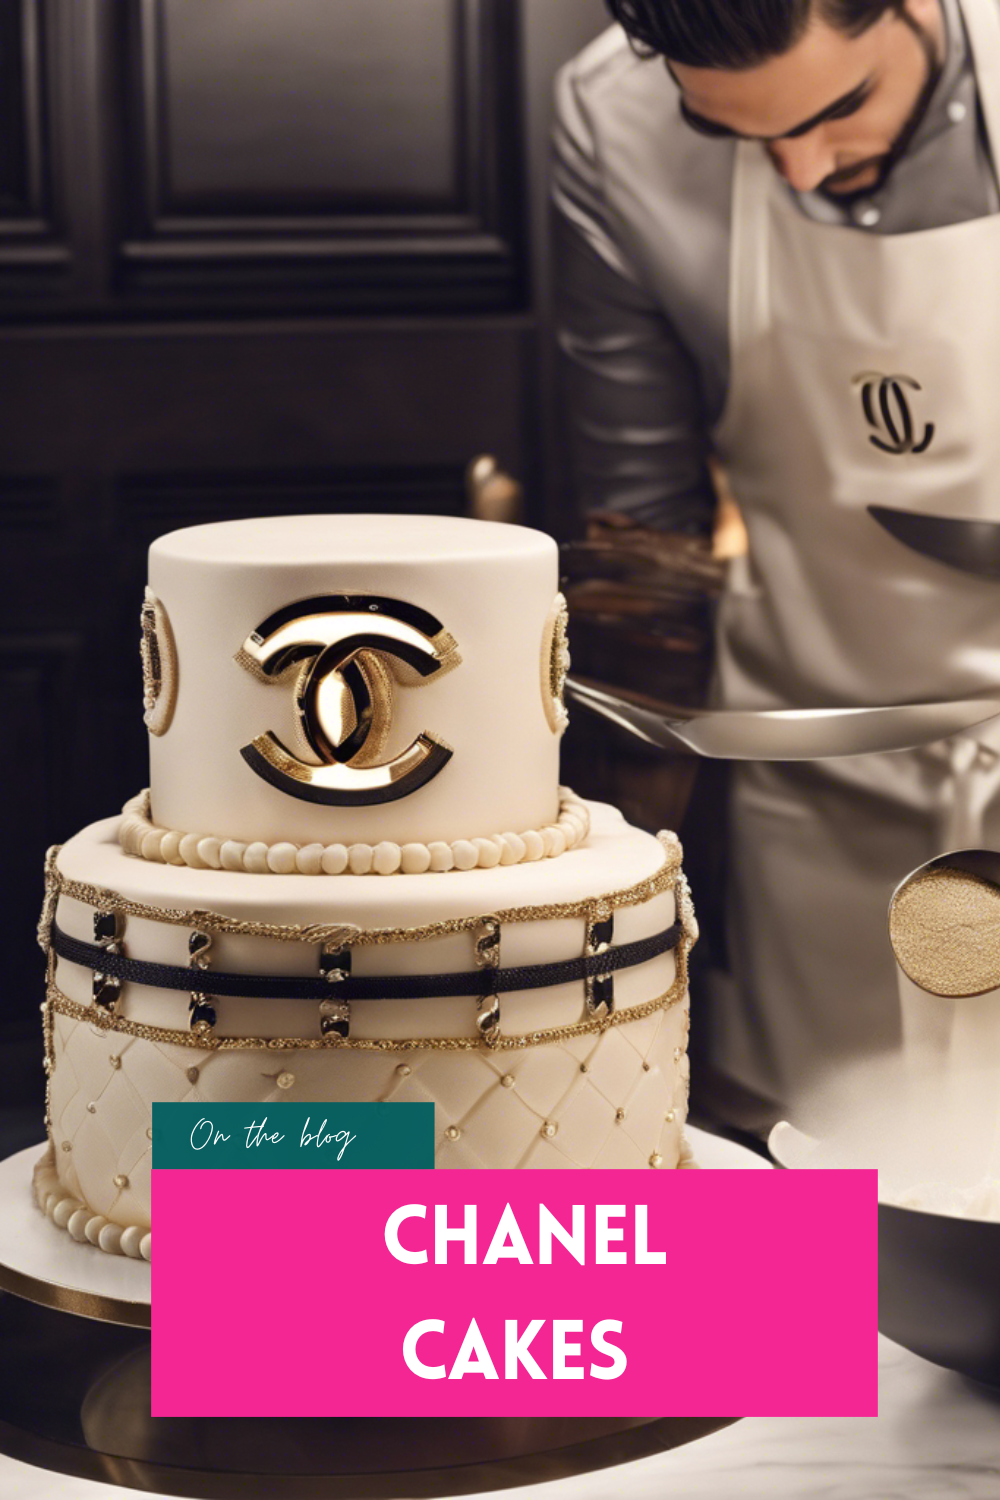 Enjoy 100+ Trendy Chanel Cakes Designs For Your Birthday or Wedding